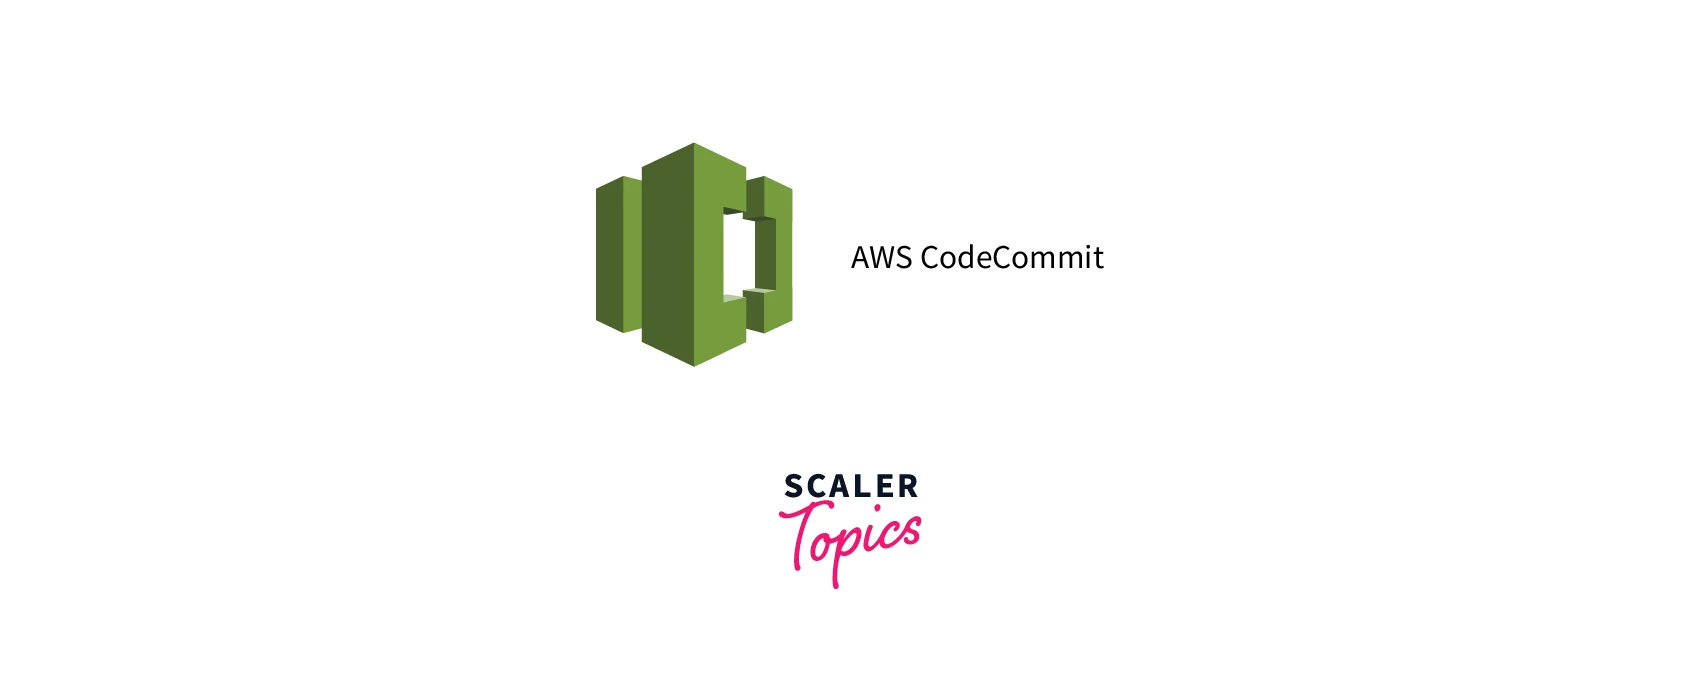 What is AWS Code Commit